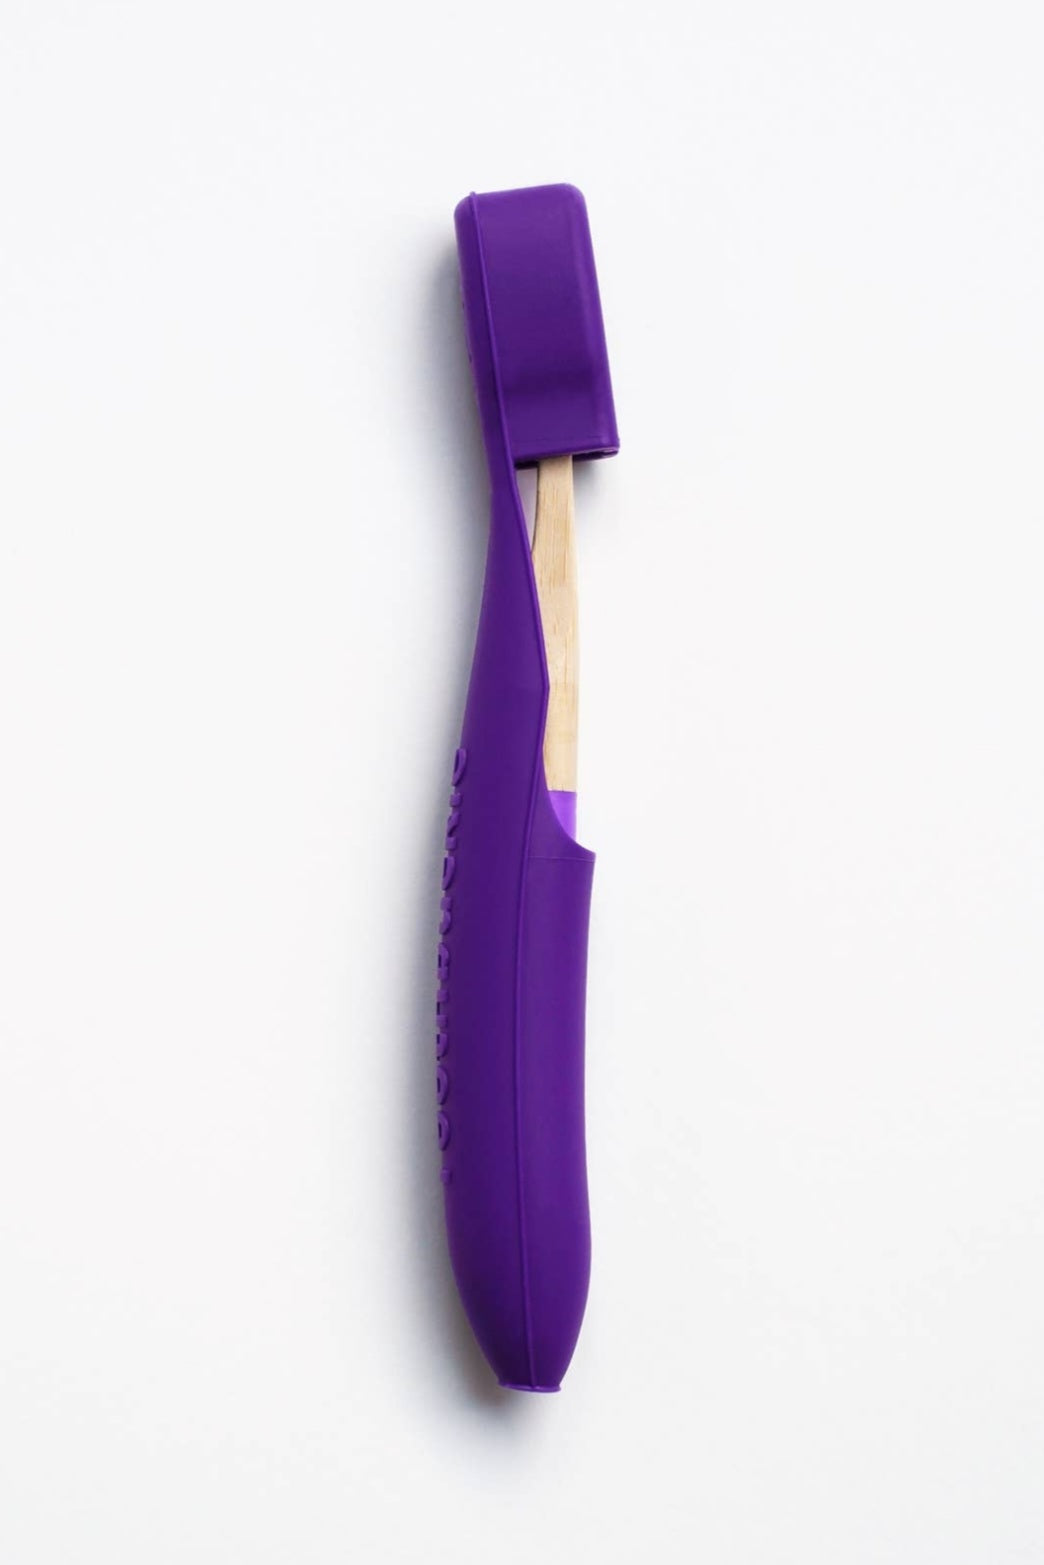 Purple Bamboo Toothbrush Fully Recyclable, Vegan Shipping calculated at Checkout